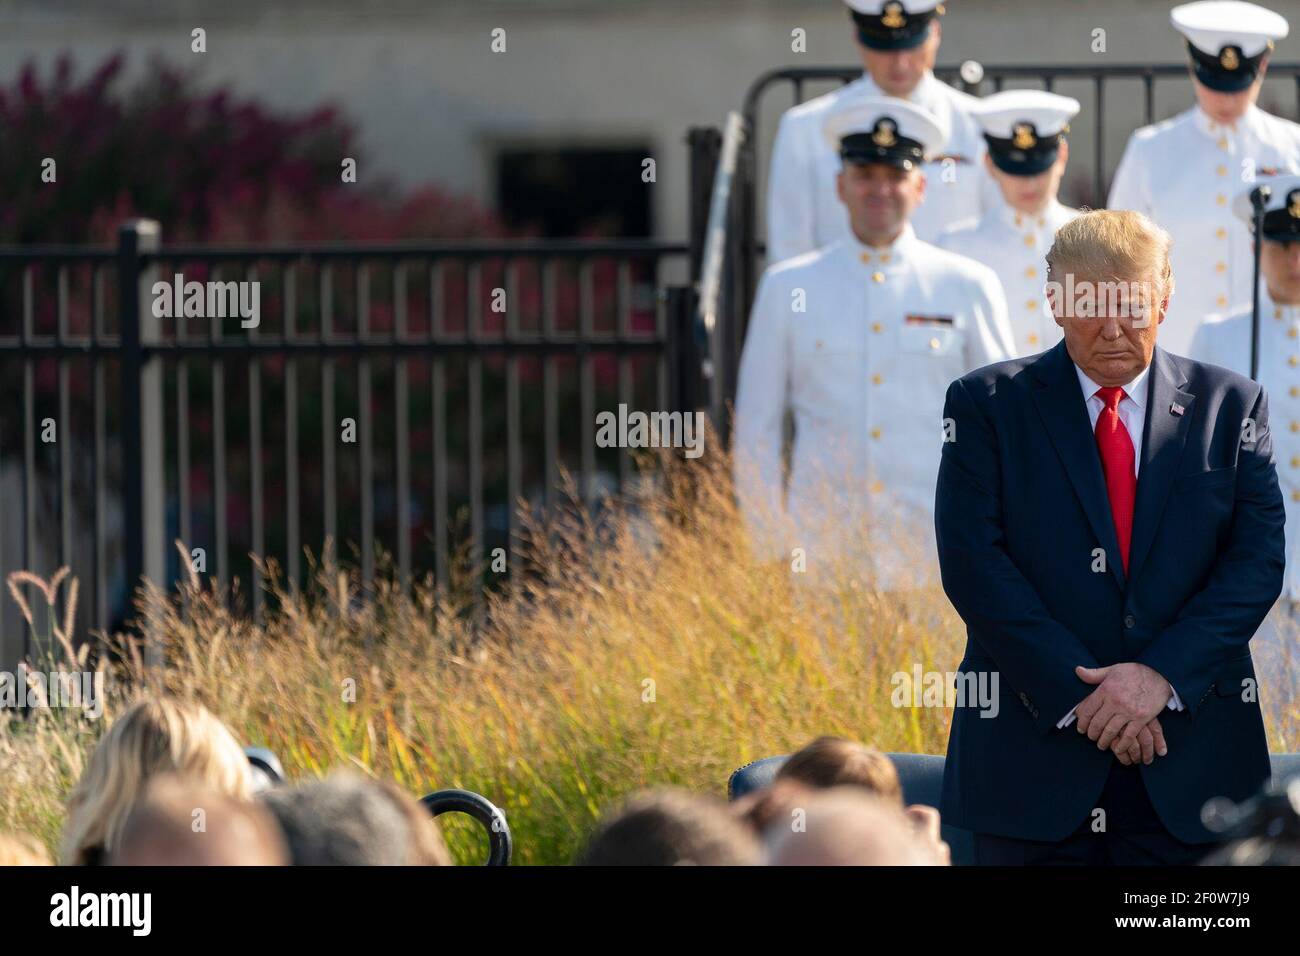 President Donald Trump delivers remarks at a September 11th Pentagon Observance Ceremony Wednesday Sep.11 2019 at the Pentagon in Arlington Va. Stock Photo